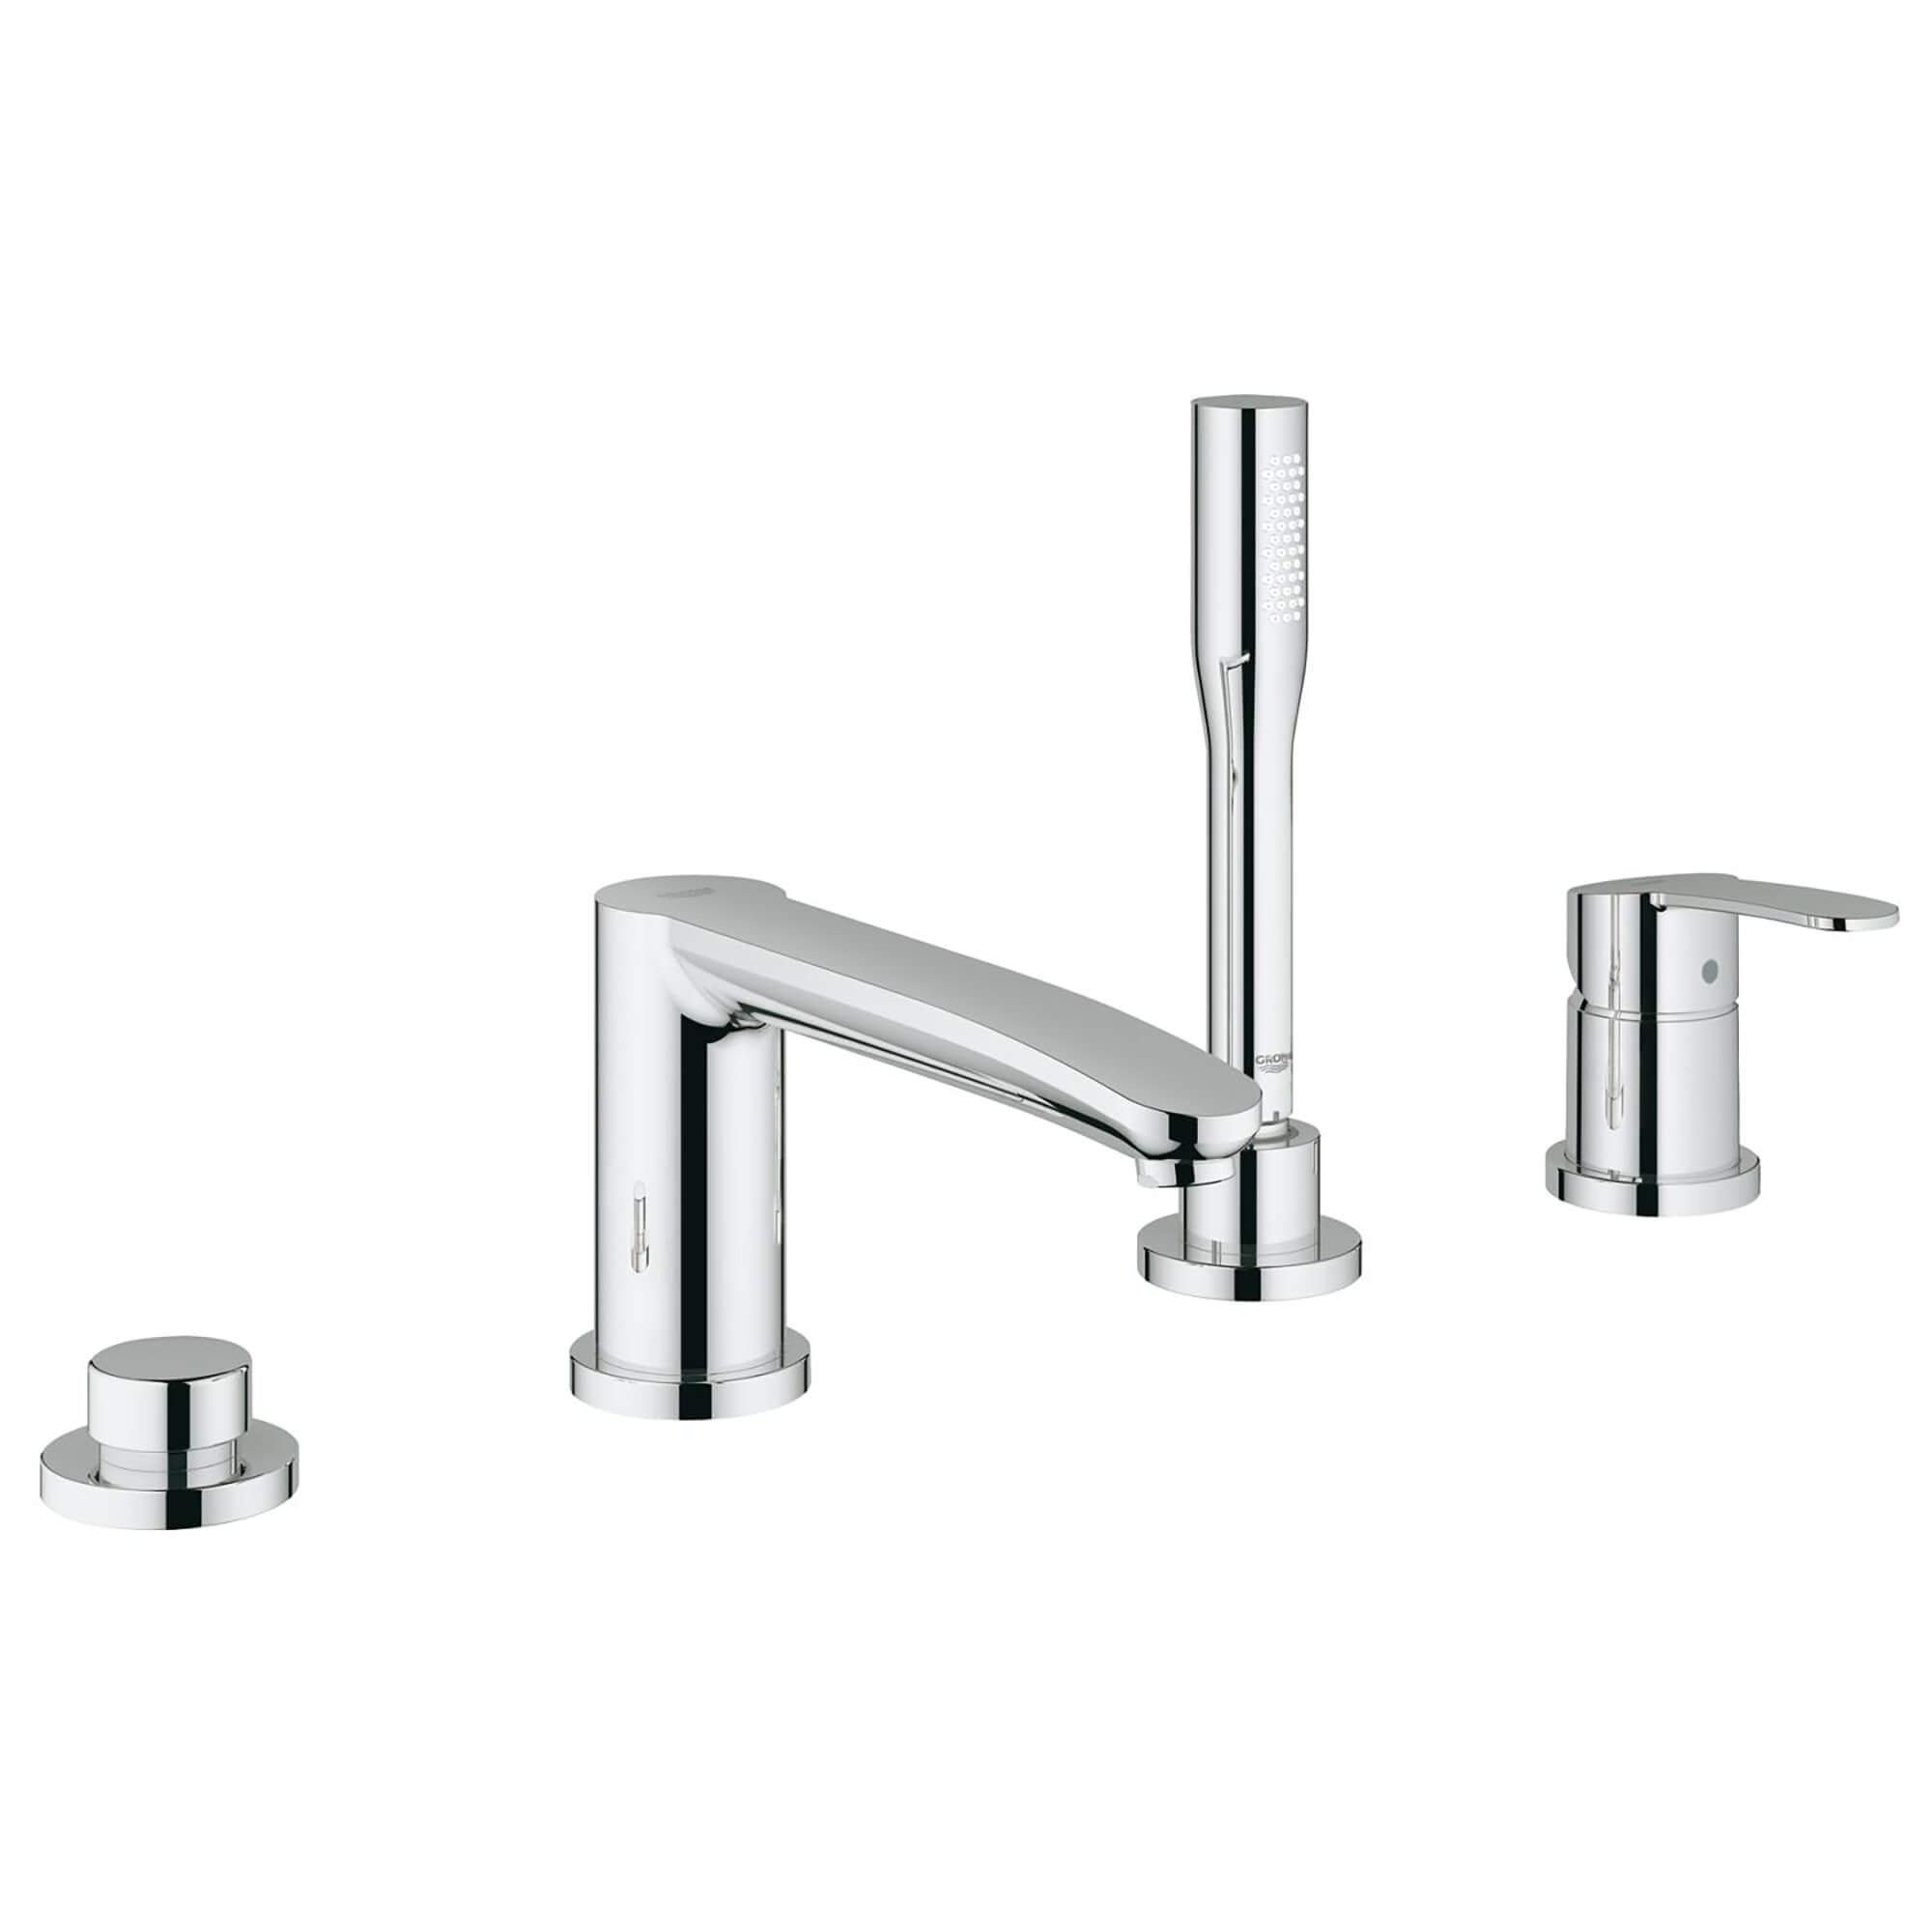 Eurostyle Cosmopolitan Roman Tub Filler With Personal Hand Shower GROHE CHROME